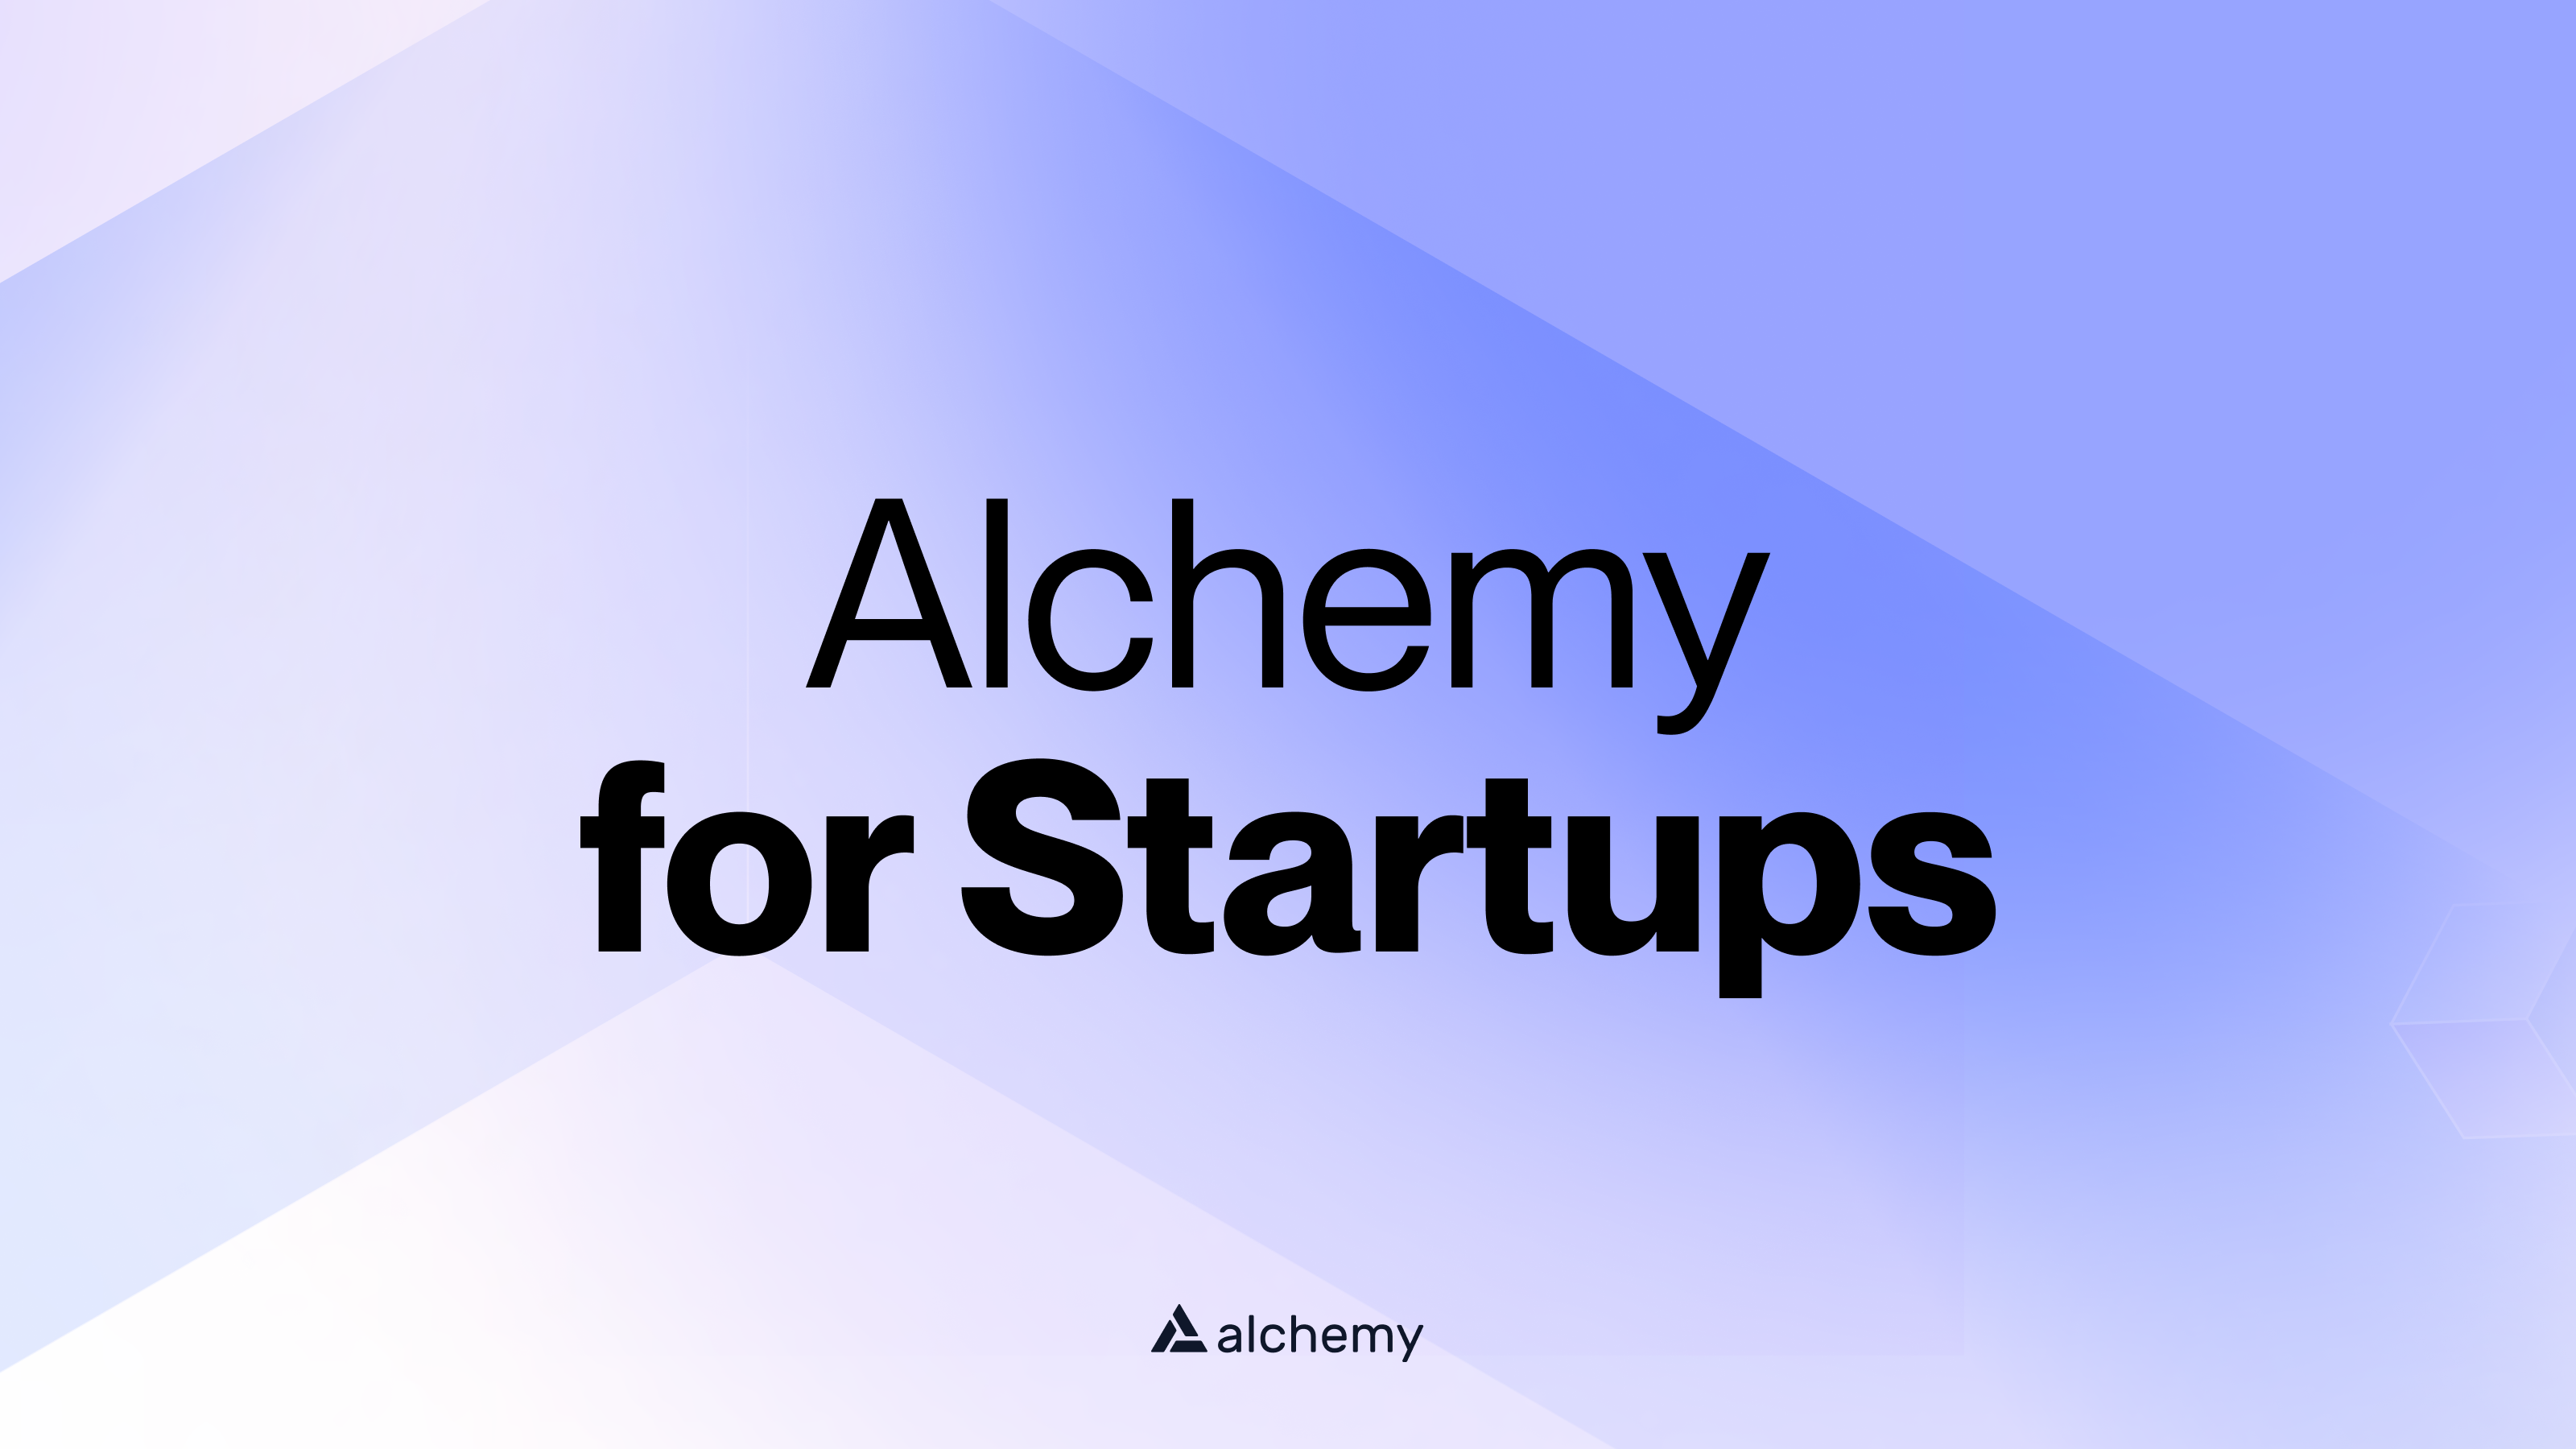 Build and scale your startup with dedicated startup resources and support.